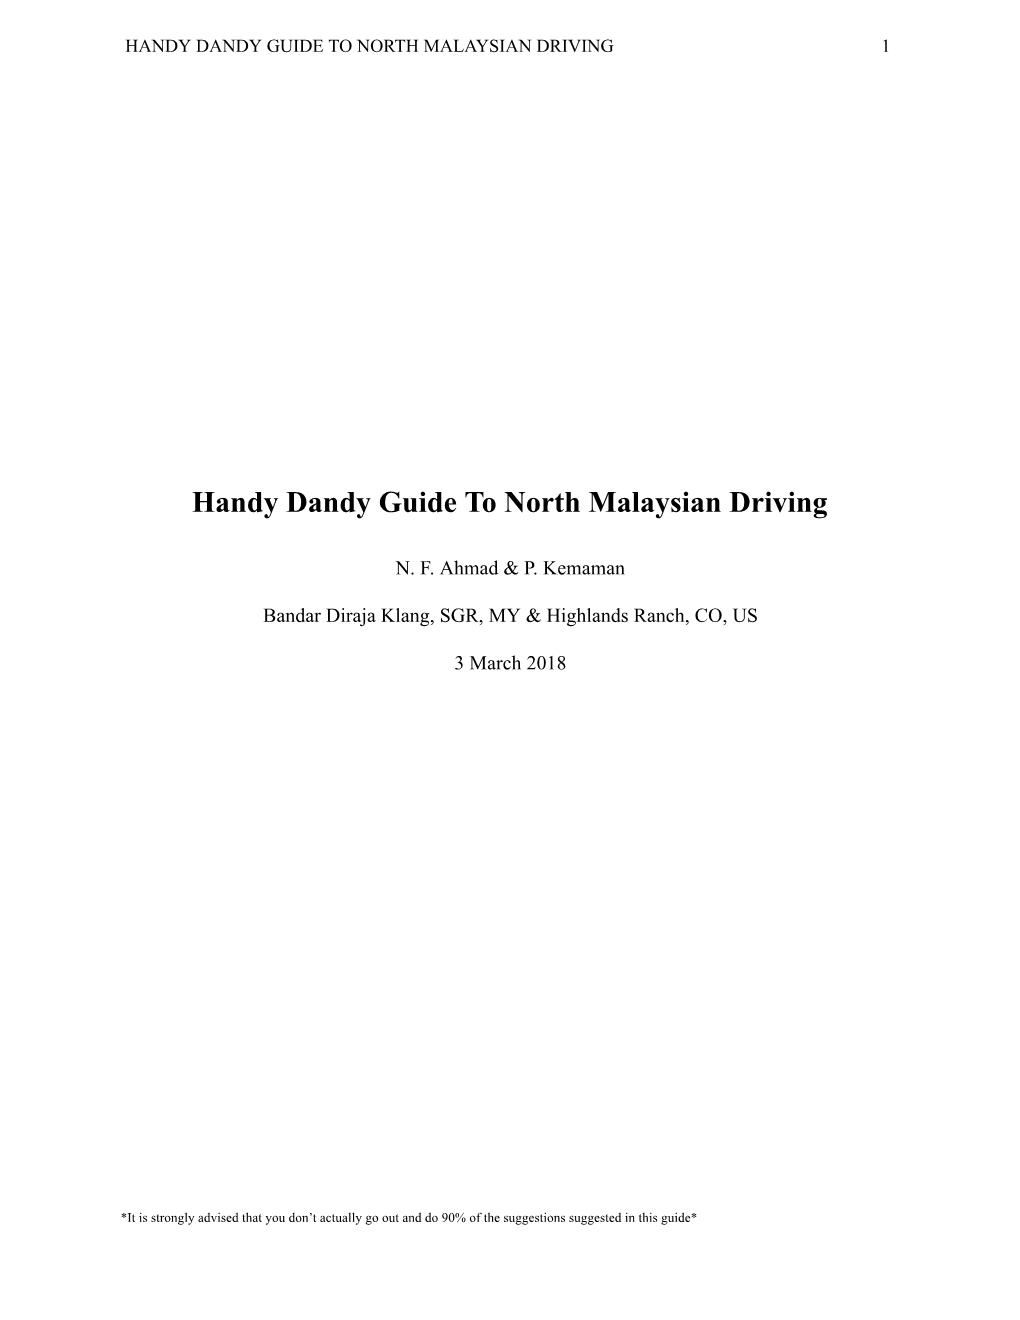 Handy Dandy Guide to North Malaysian Driving 1